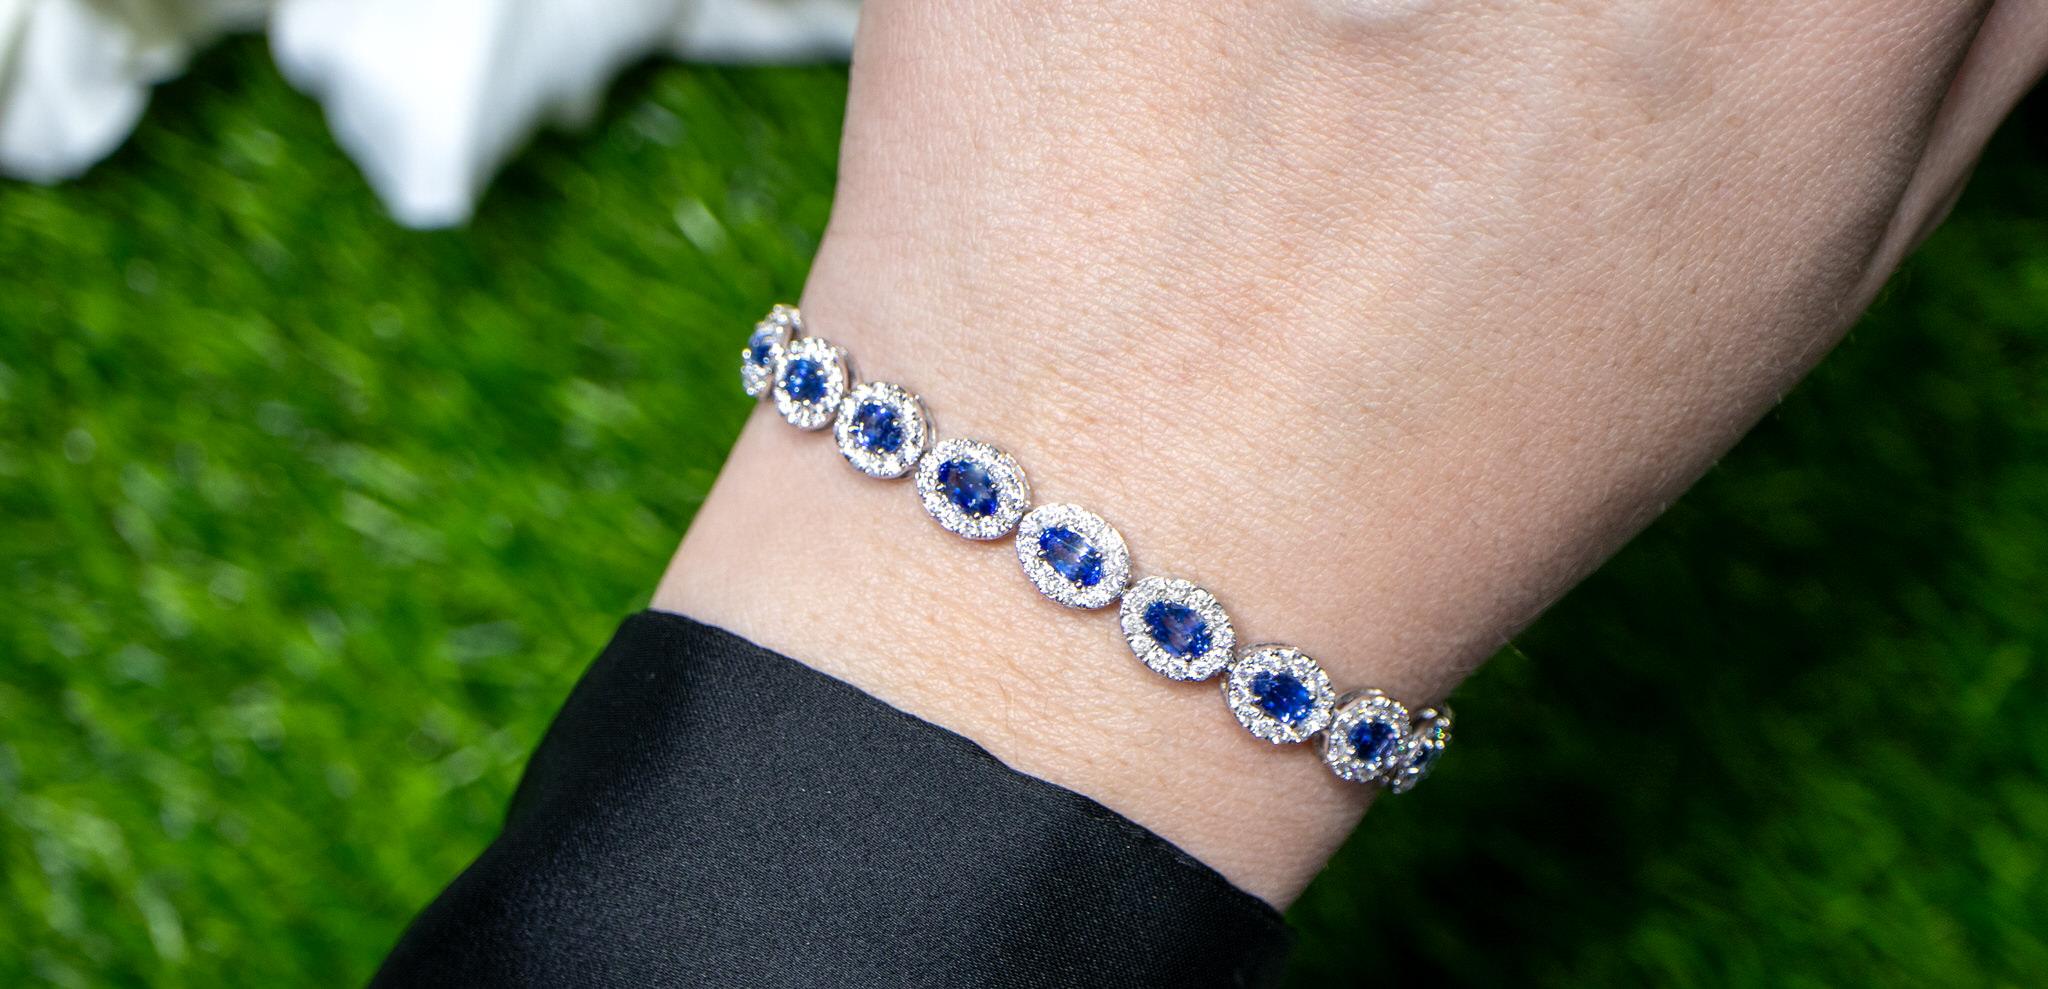 It comes with the Gemological Appraisal by GIA GG/AJP
All Gemstones are Natural
Blue Sapphires = 6.73 Carats
Diamonds = 3.28 Carats
Metal: 18K White Gold
Length: 7 Inches
Width: 0.27 Inches